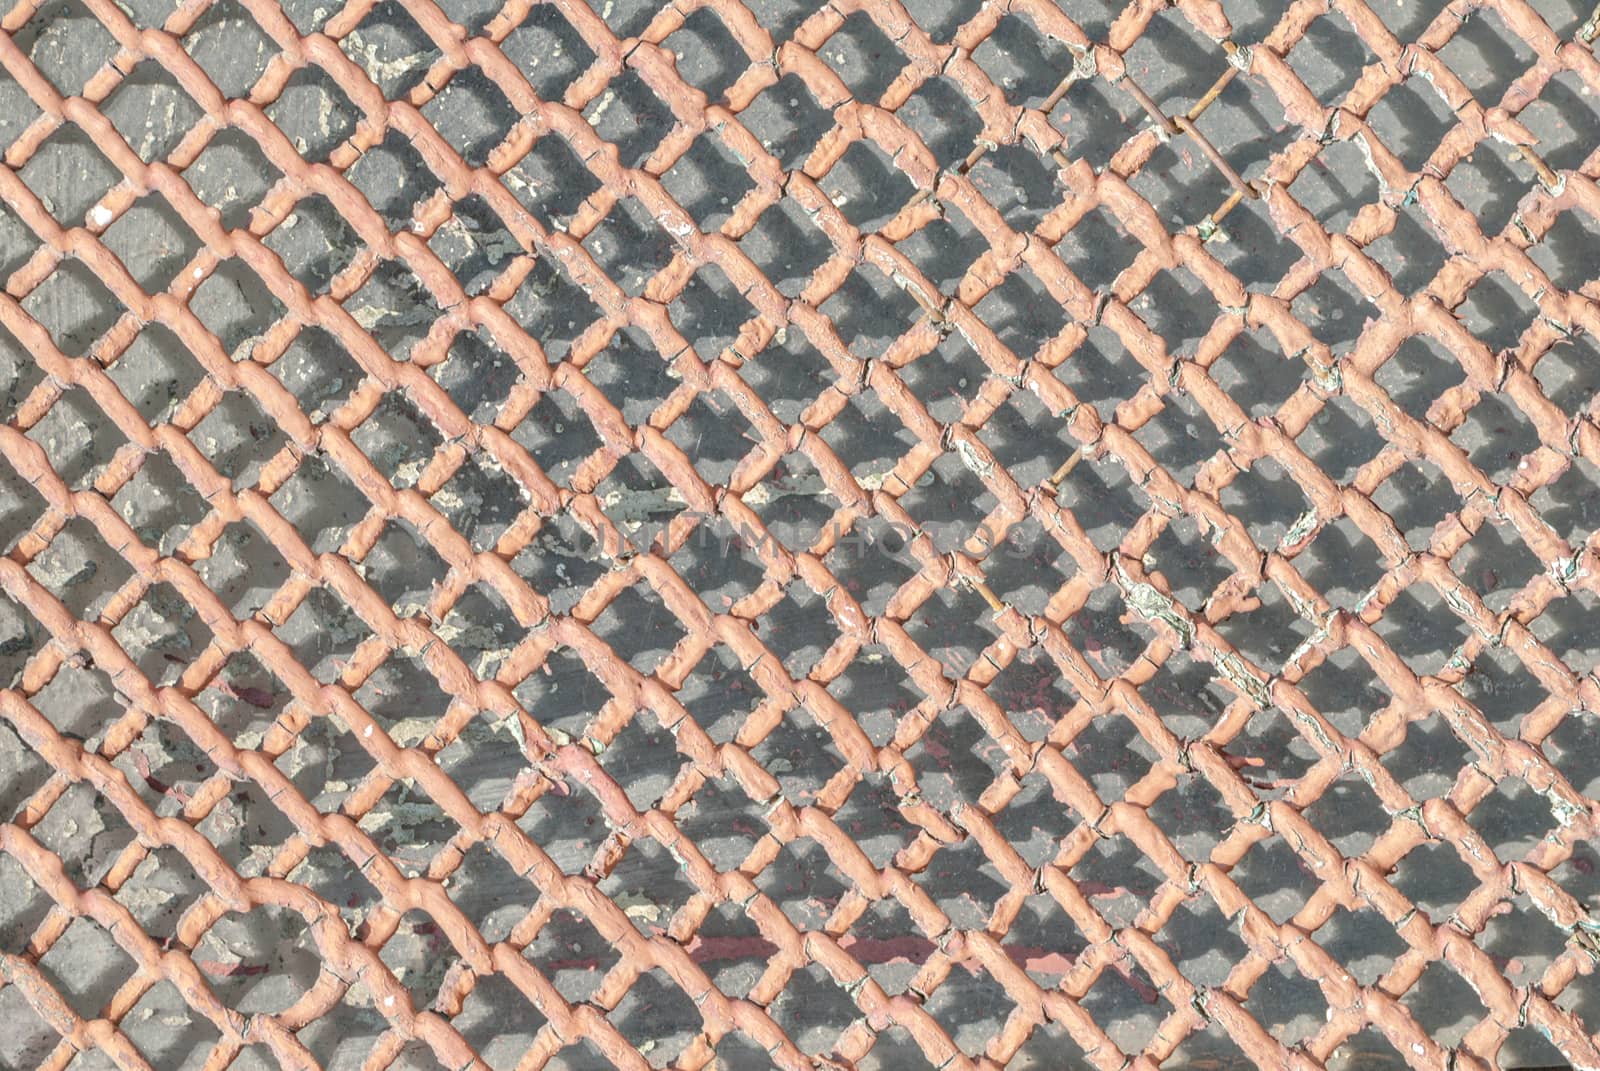 old metal grid, grunge metal surface, great background or texture for your project by uvisni